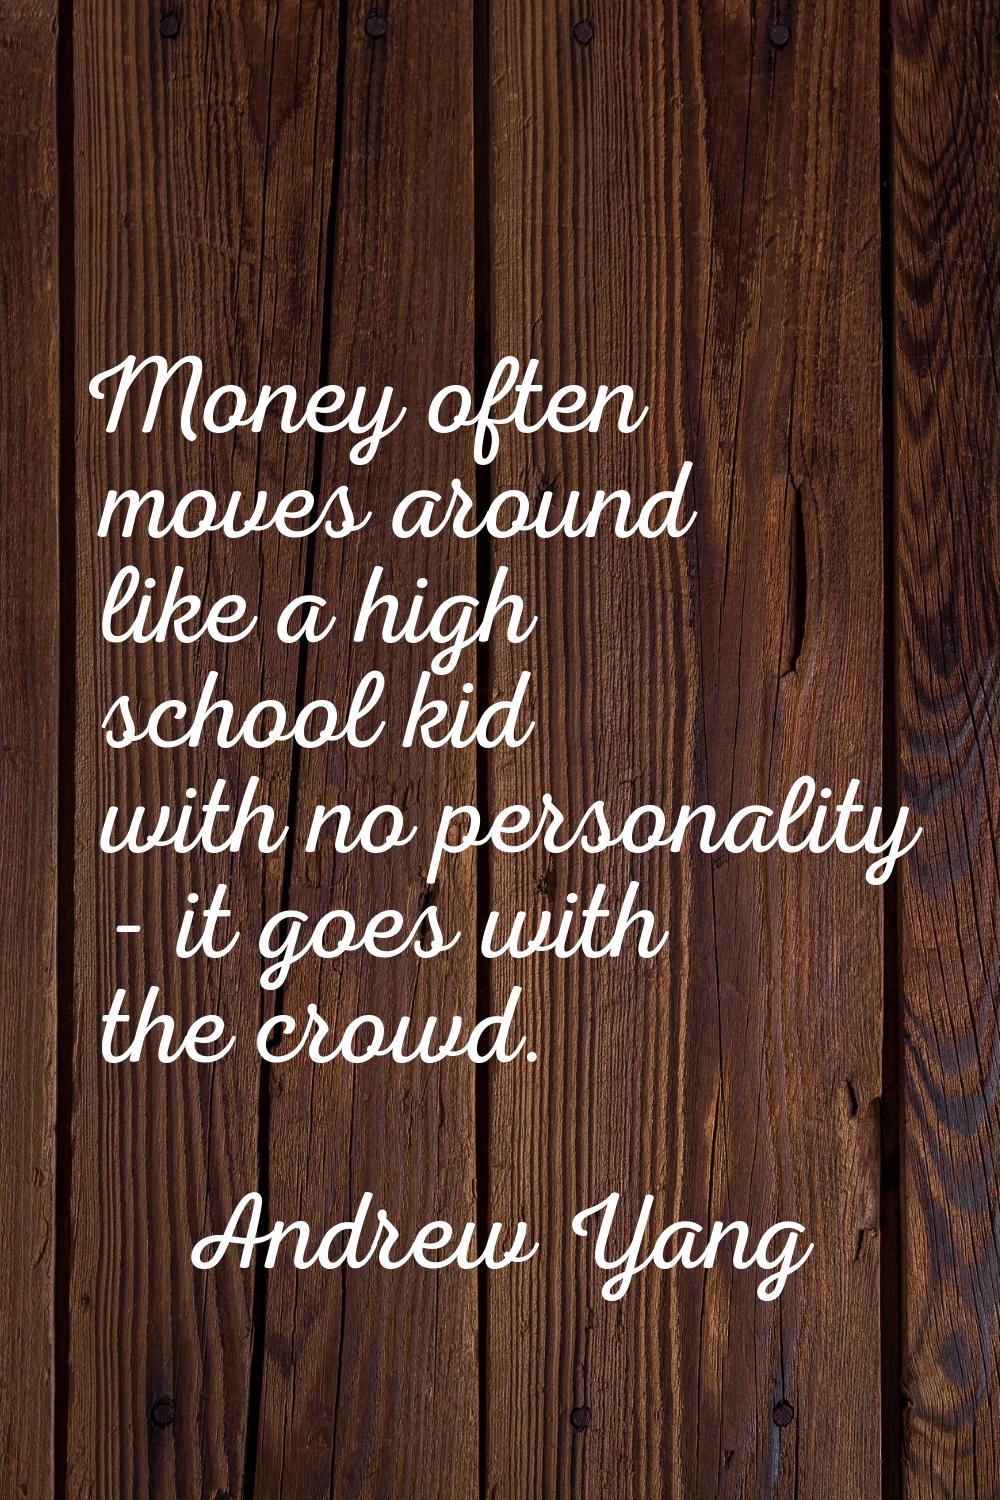 Money often moves around like a high school kid with no personality - it goes with the crowd.